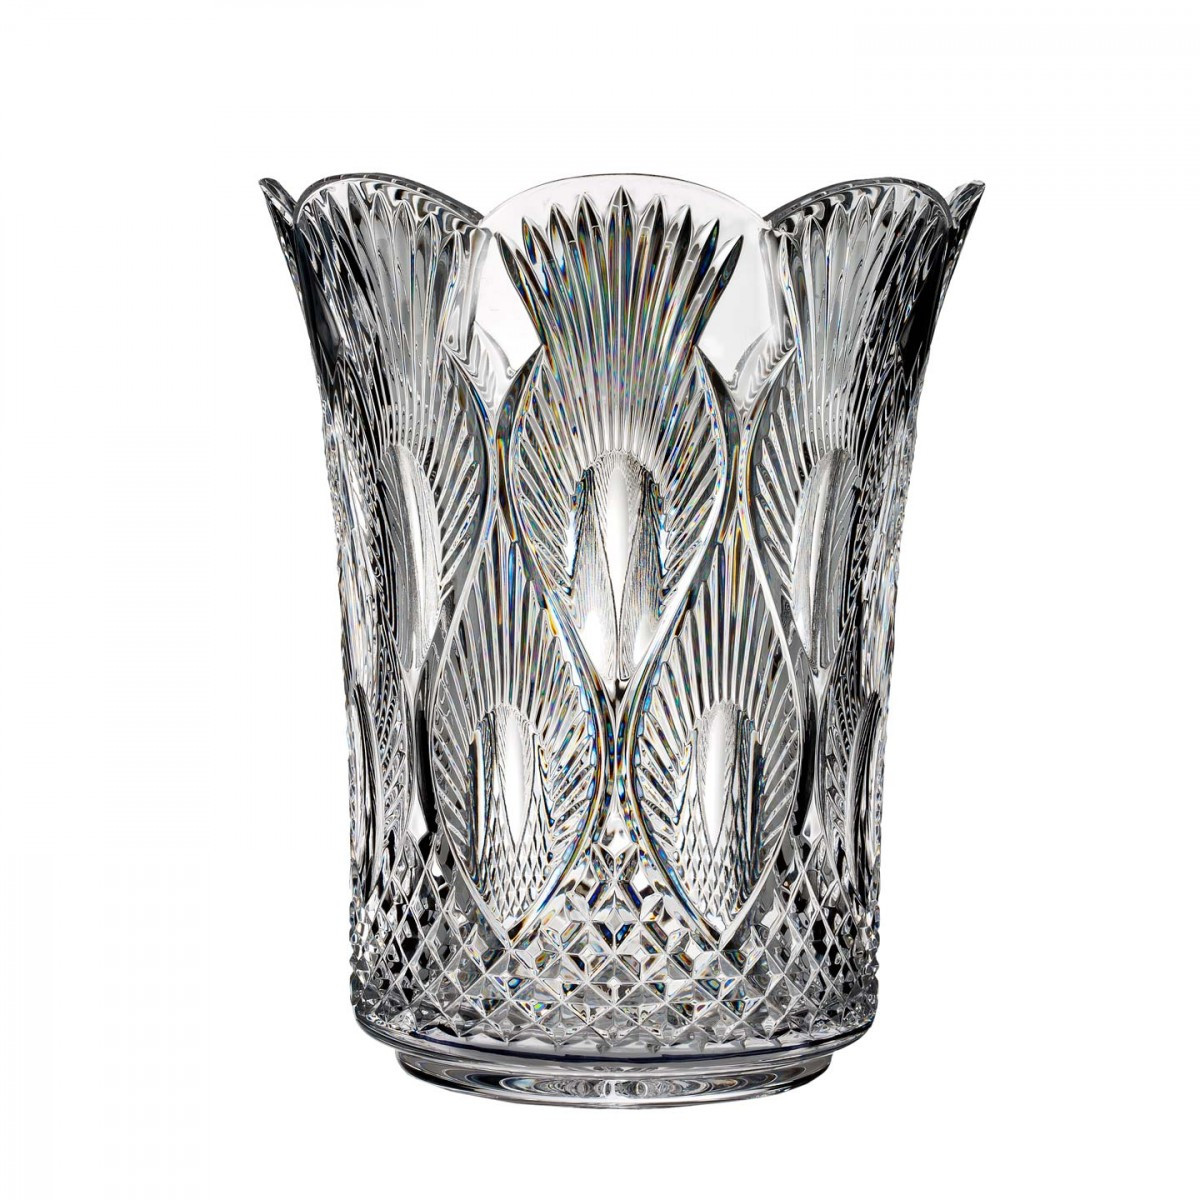 22 Stylish Waterford Maritana Vase 2024 free download waterford maritana vase of peacock 12in vase discontinued house of waterford crystal us throughout peacock 12in vase discontinued